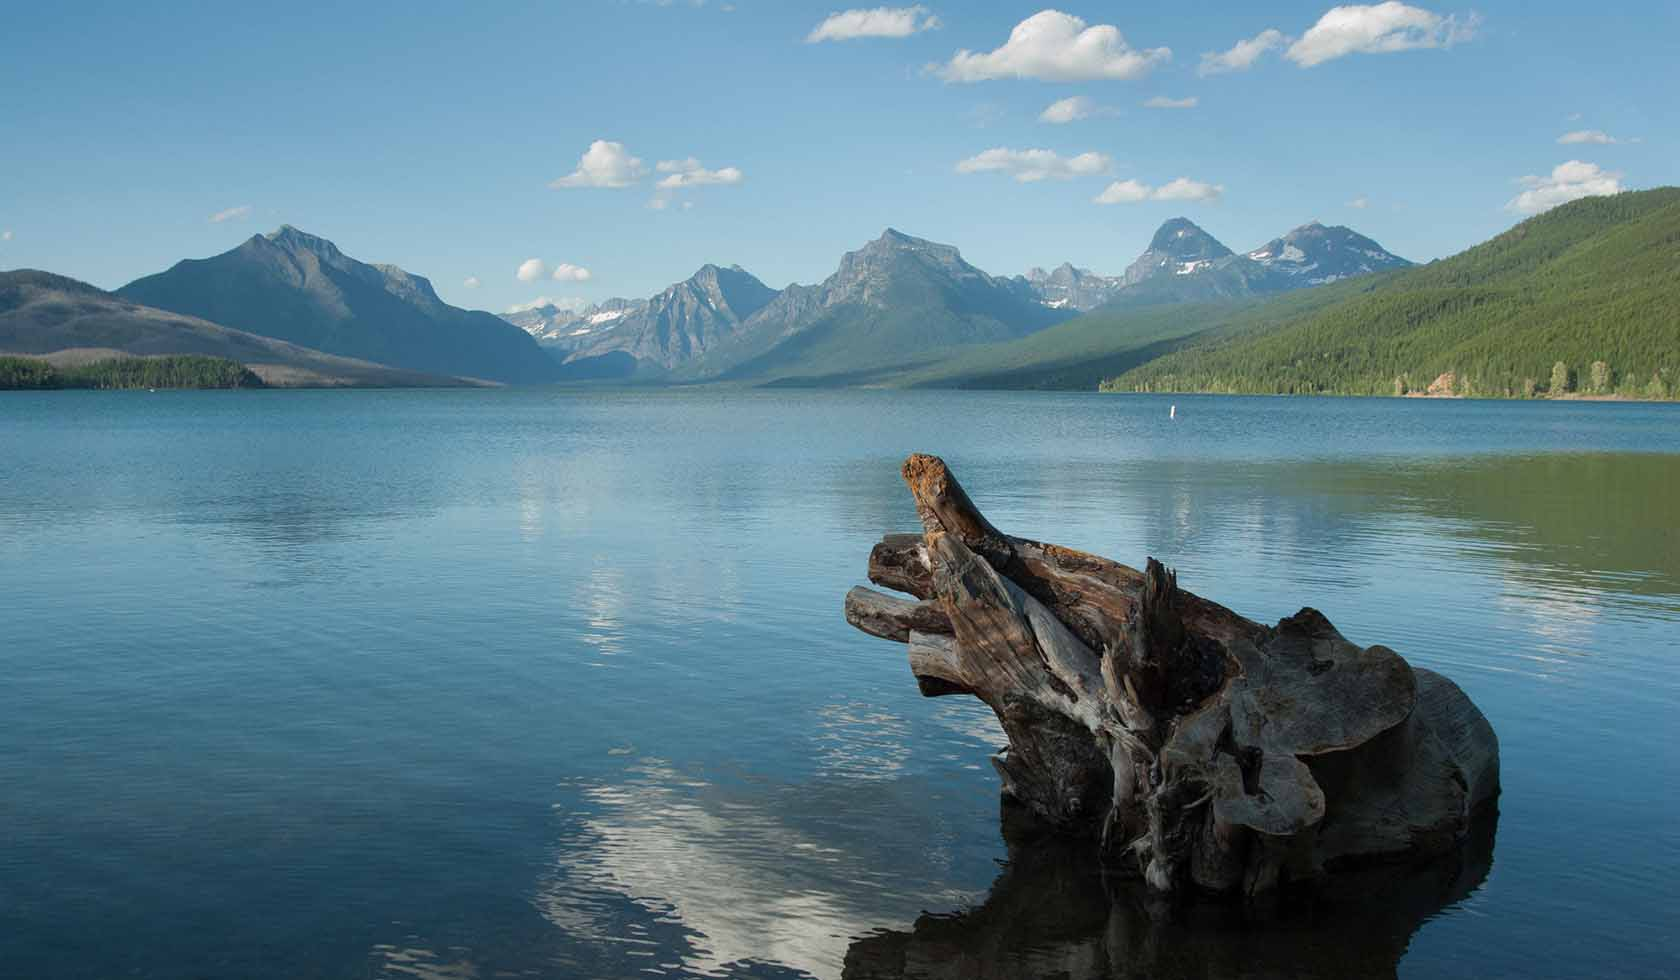 glacier park, from the north end to the east shore or whitewater paddling will be an adventure, paddle boarders may find a sandy beach, rocky cliffs or majestic bighorn sheep